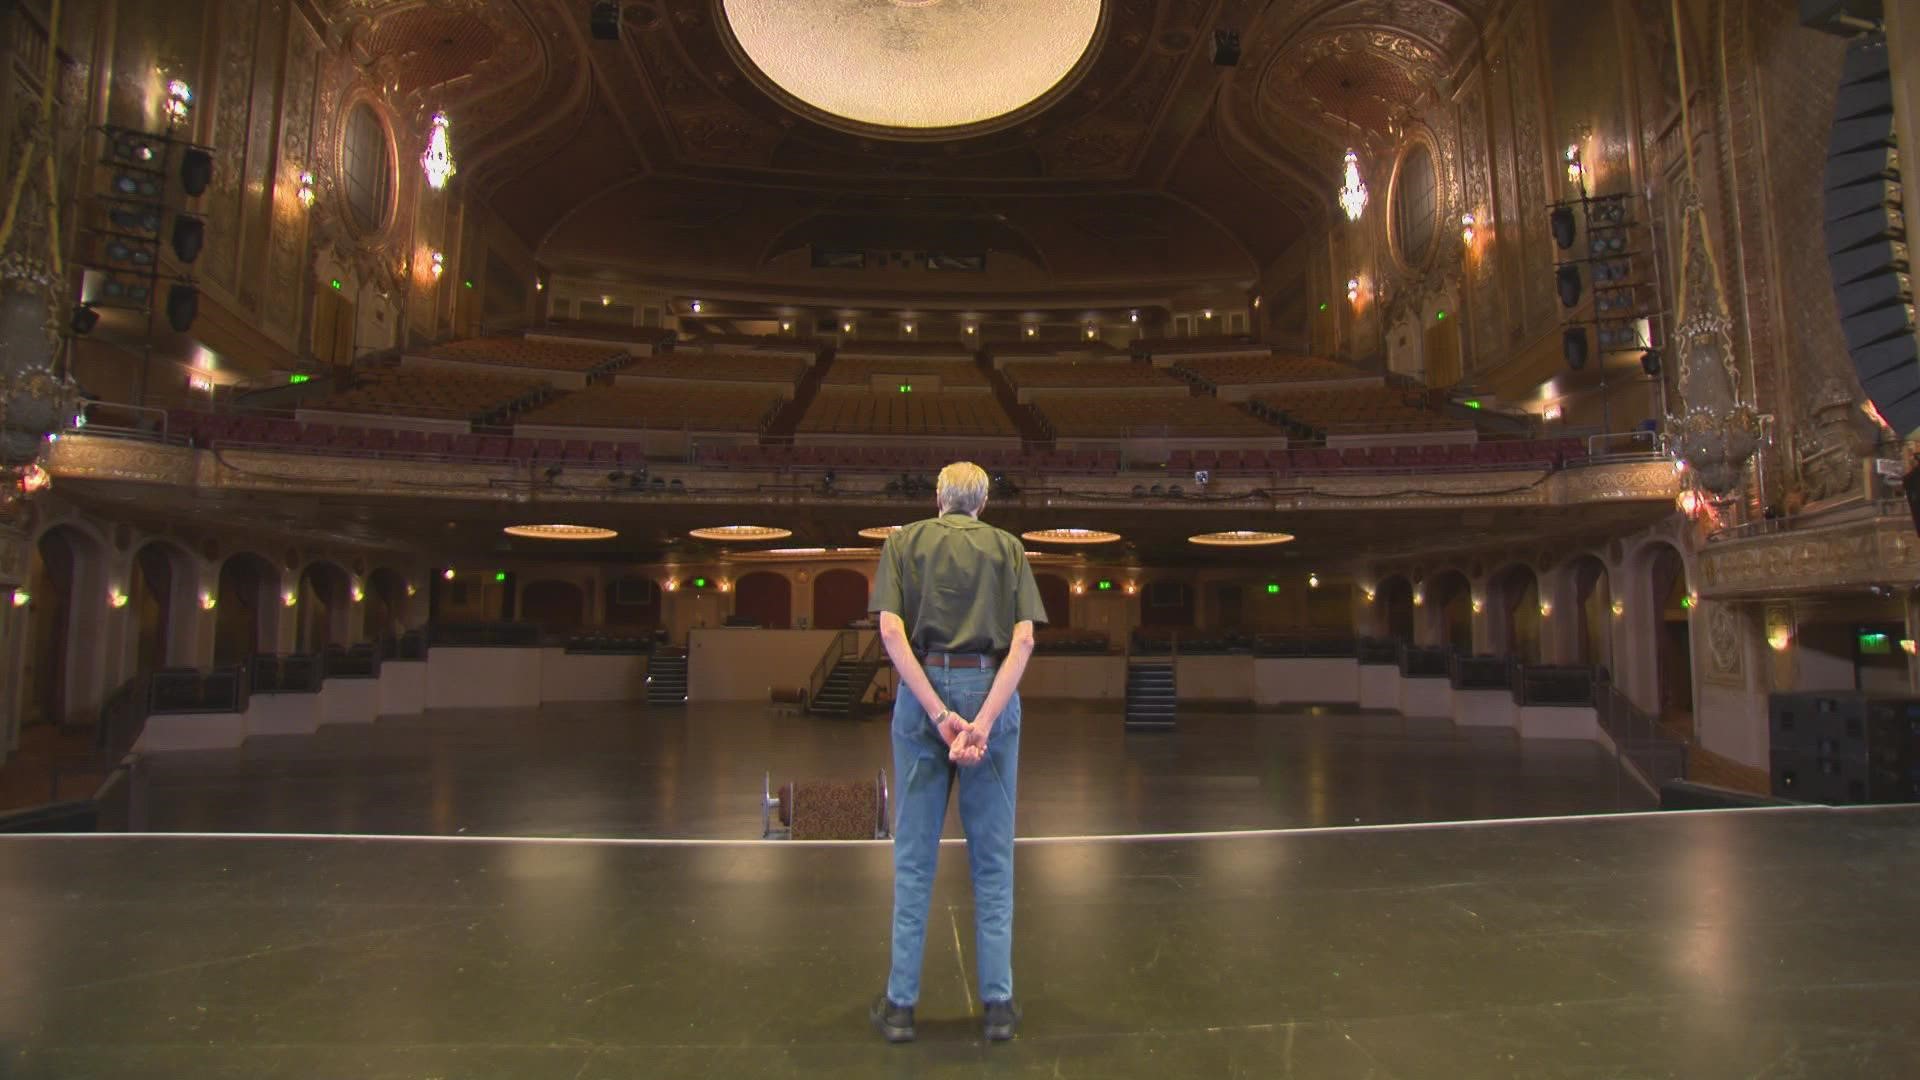 Mike Miles was hired at age 16 and has stewarded the historic theater through countless concerts, readings, and Broadway productions. #k5evening